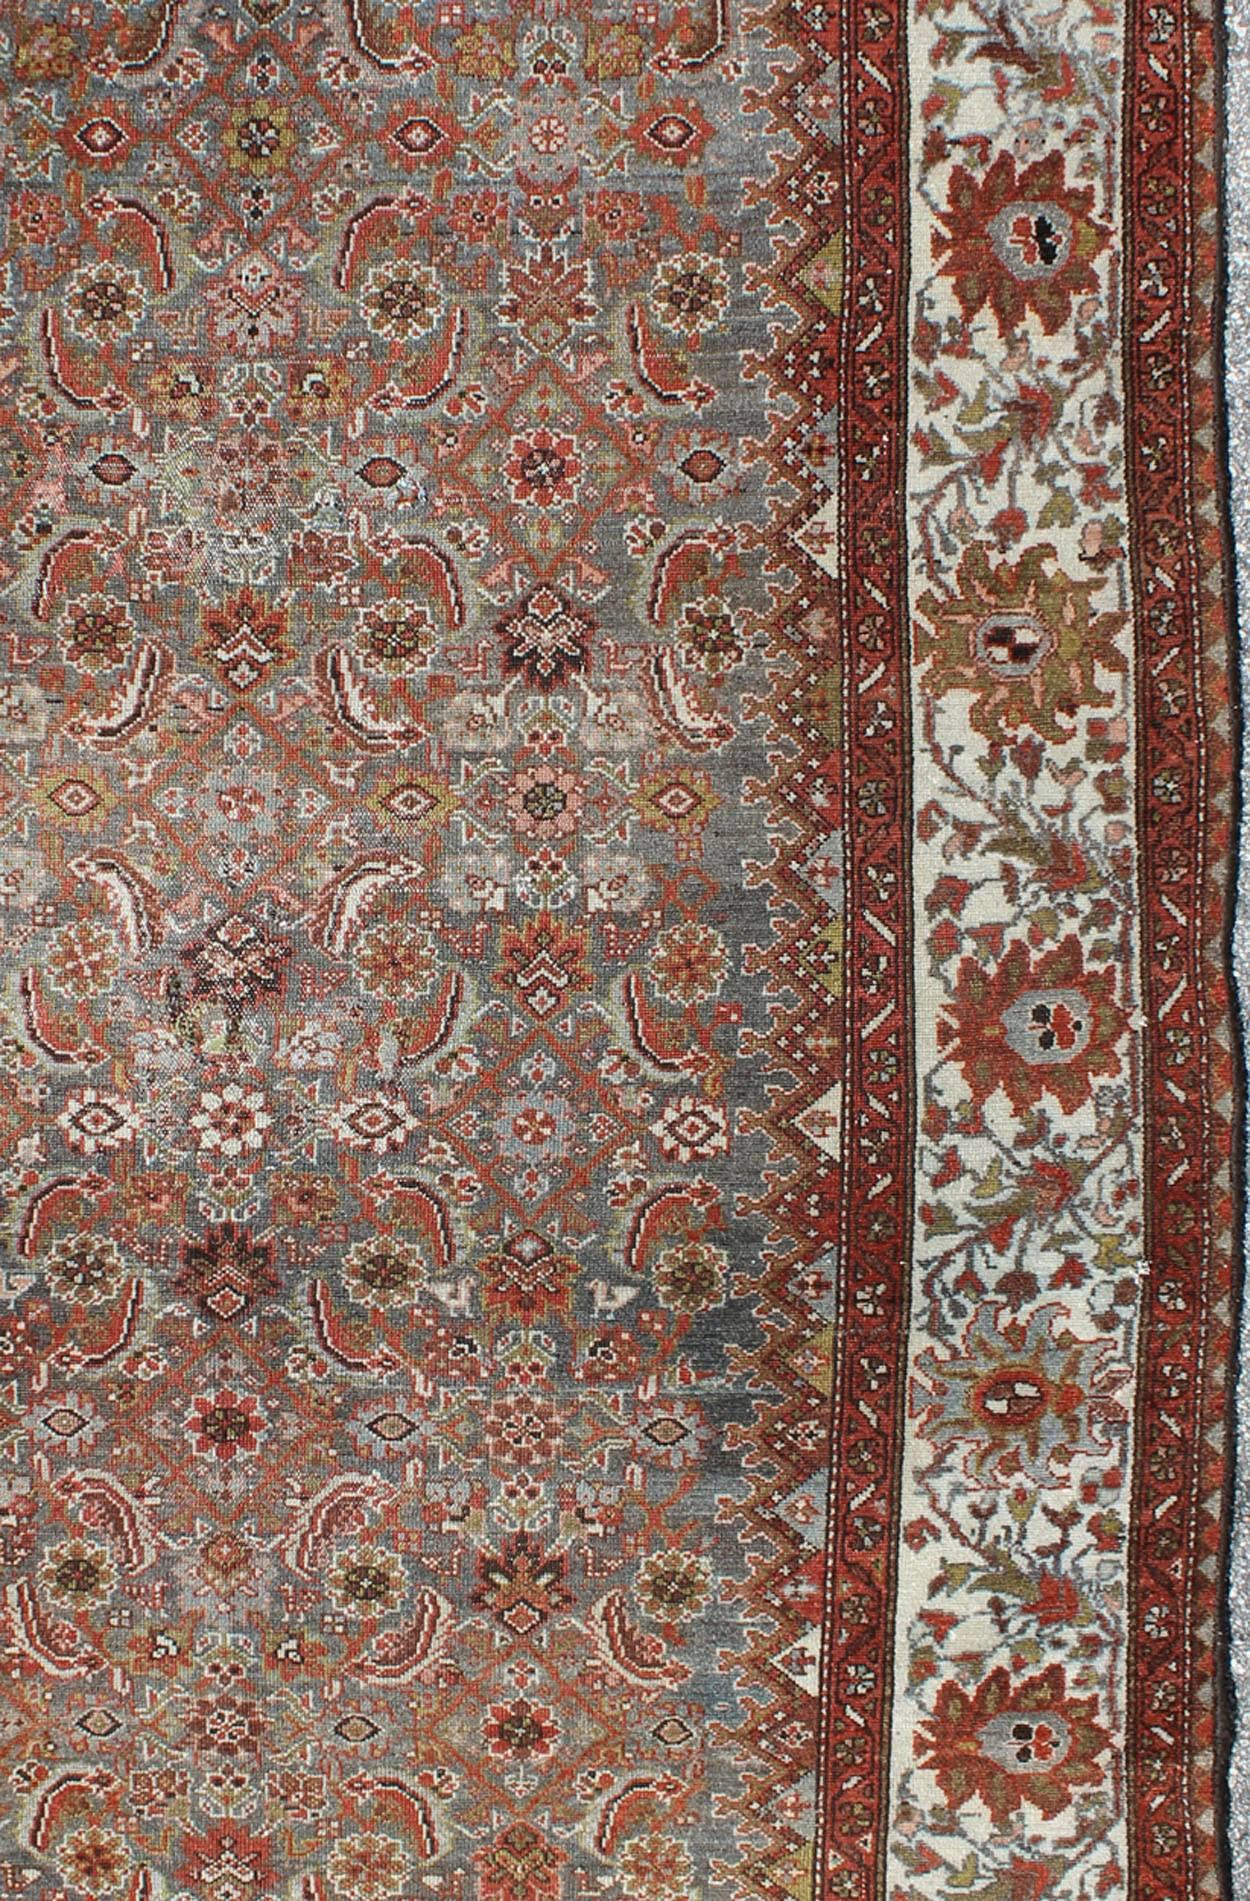 Antique Persian Malayer Rug with Gray, Light Blue, Red and Taupe In Good Condition For Sale In Atlanta, GA